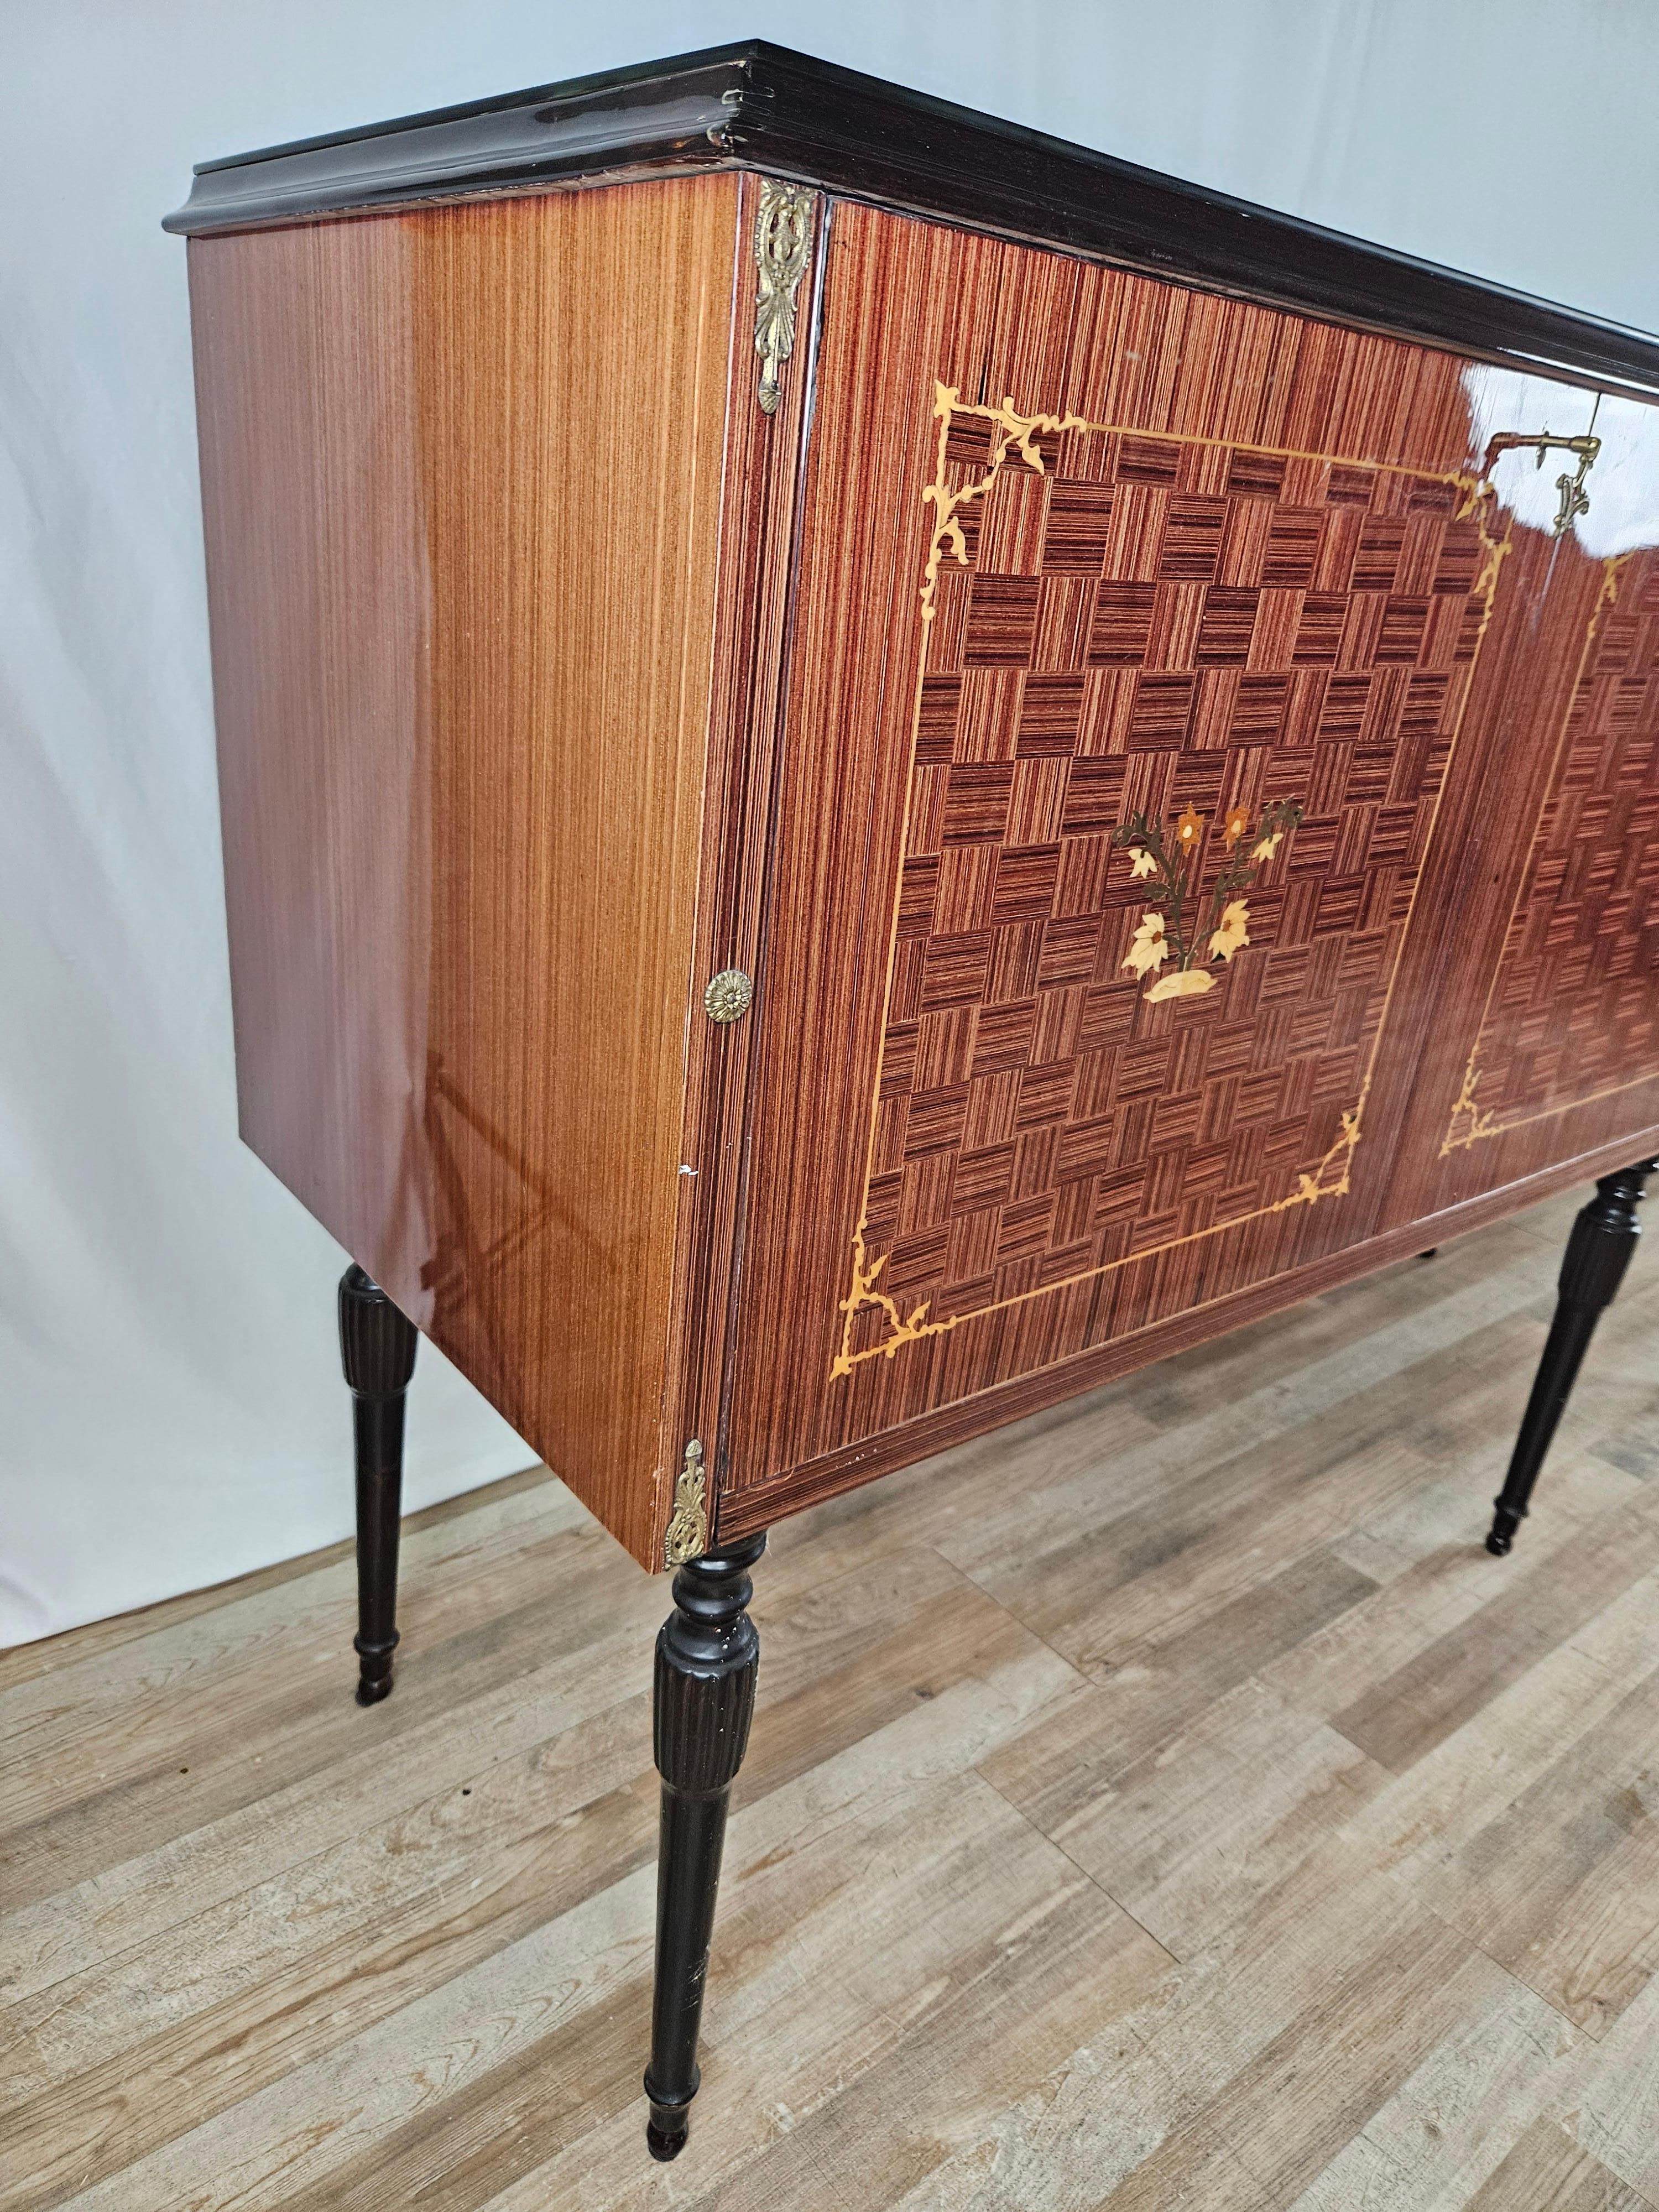 Mid-20th century Italian-made wooden living room sideboard, fine and linear frame with brass decorations and ebonized pin legs.

The glass is finely decorated with a variety of shades, linear measurements and well-defined contours make this piece of